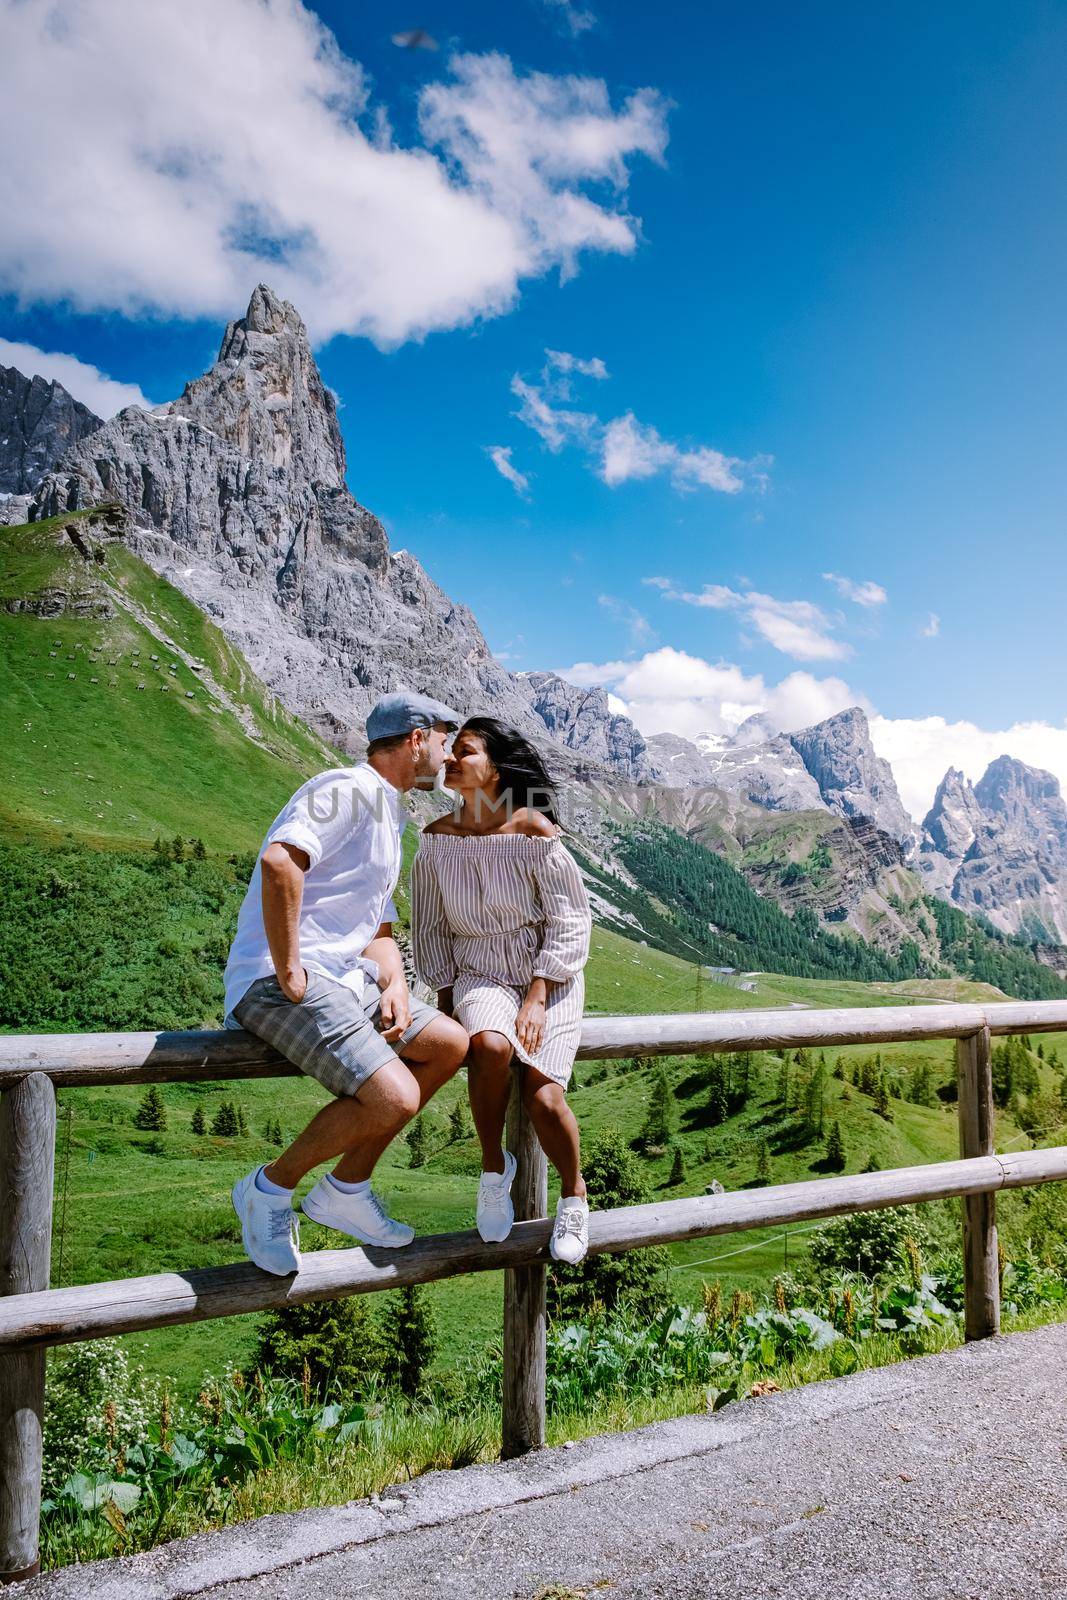 Pale di San Martino from Baita Segantini - Passo Rolle italy,Couple visit the italian Alps, View of Cimon della Pala, the best-know peak of the Pale di San Martino Group in the Dolomites, northern Italy by fokkebok